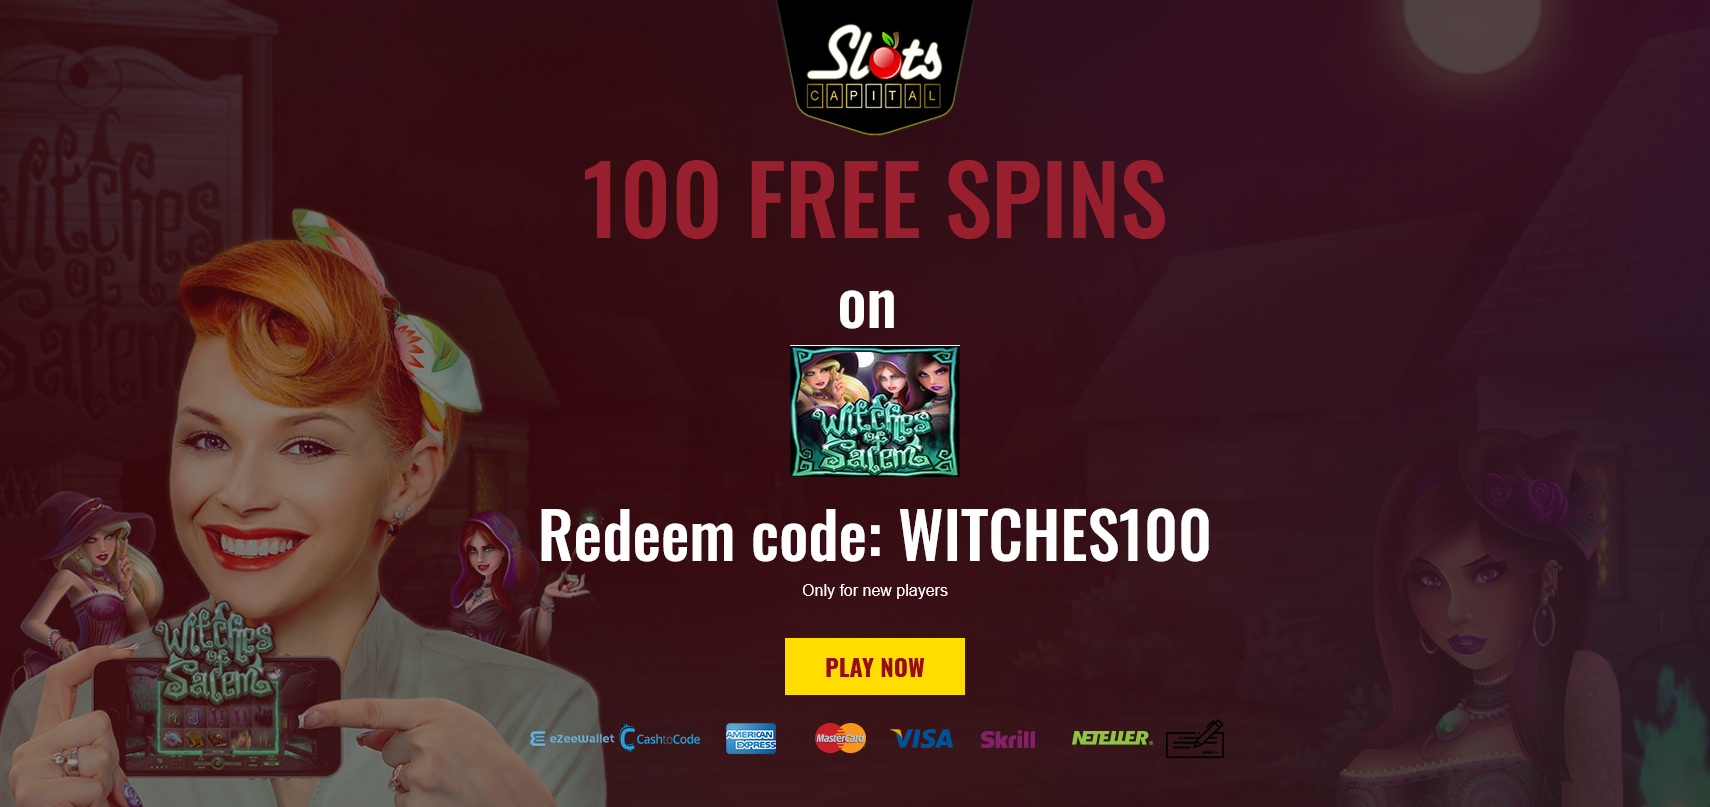 Slots Capital 100 Free Spins
                                WITCHES100